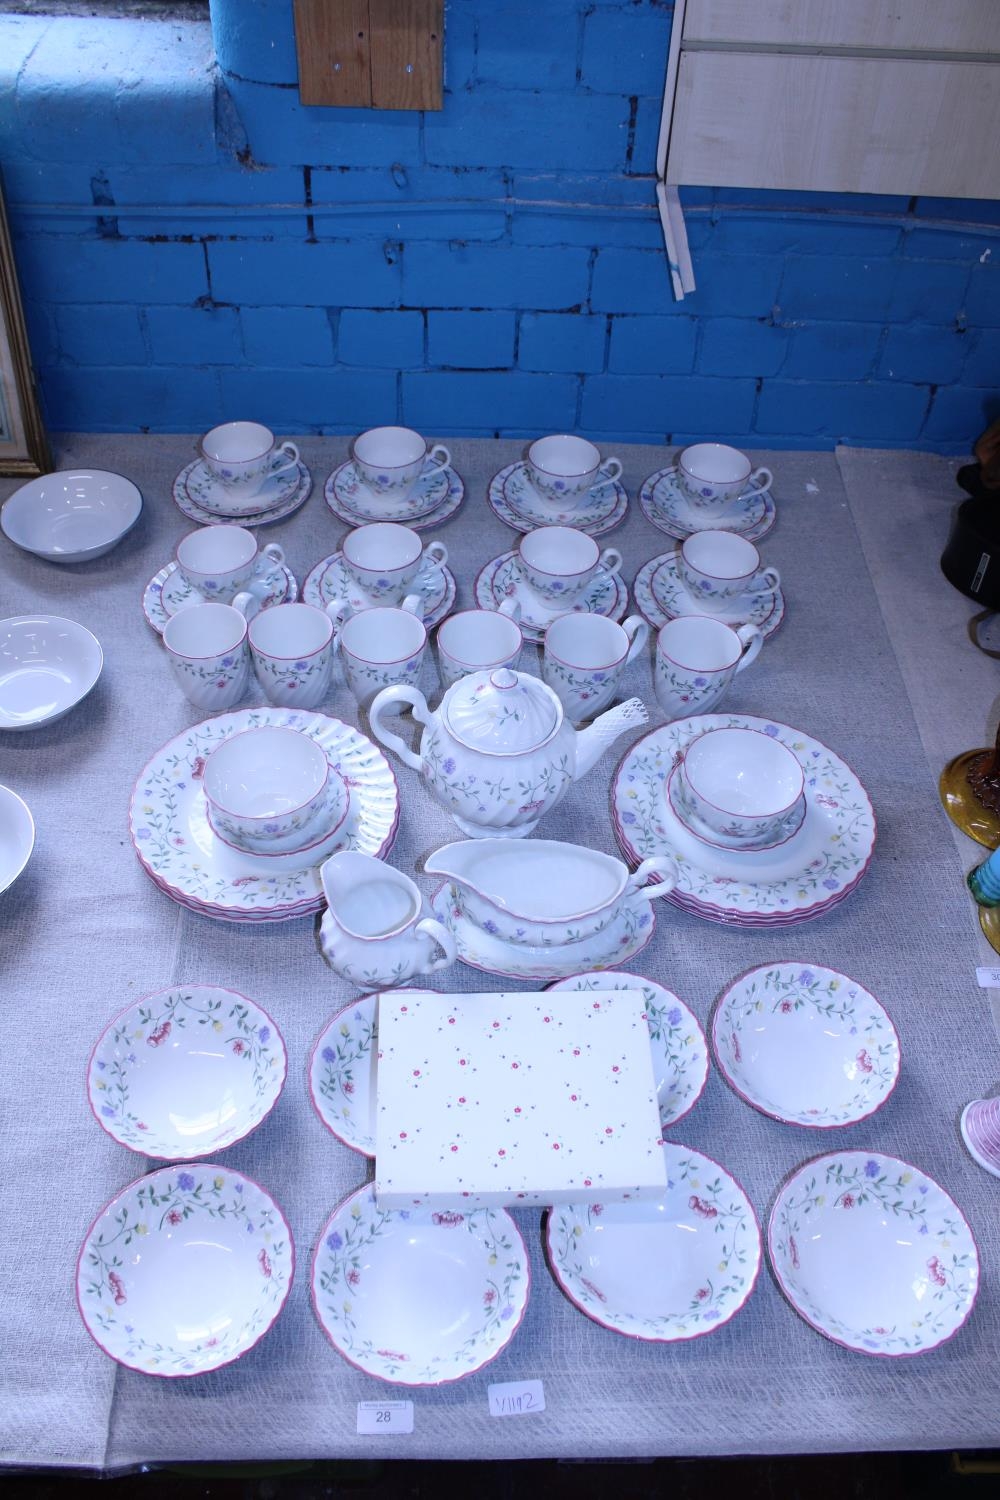 A comprehensive Johnson Brothers dinner service, shipping unavailable